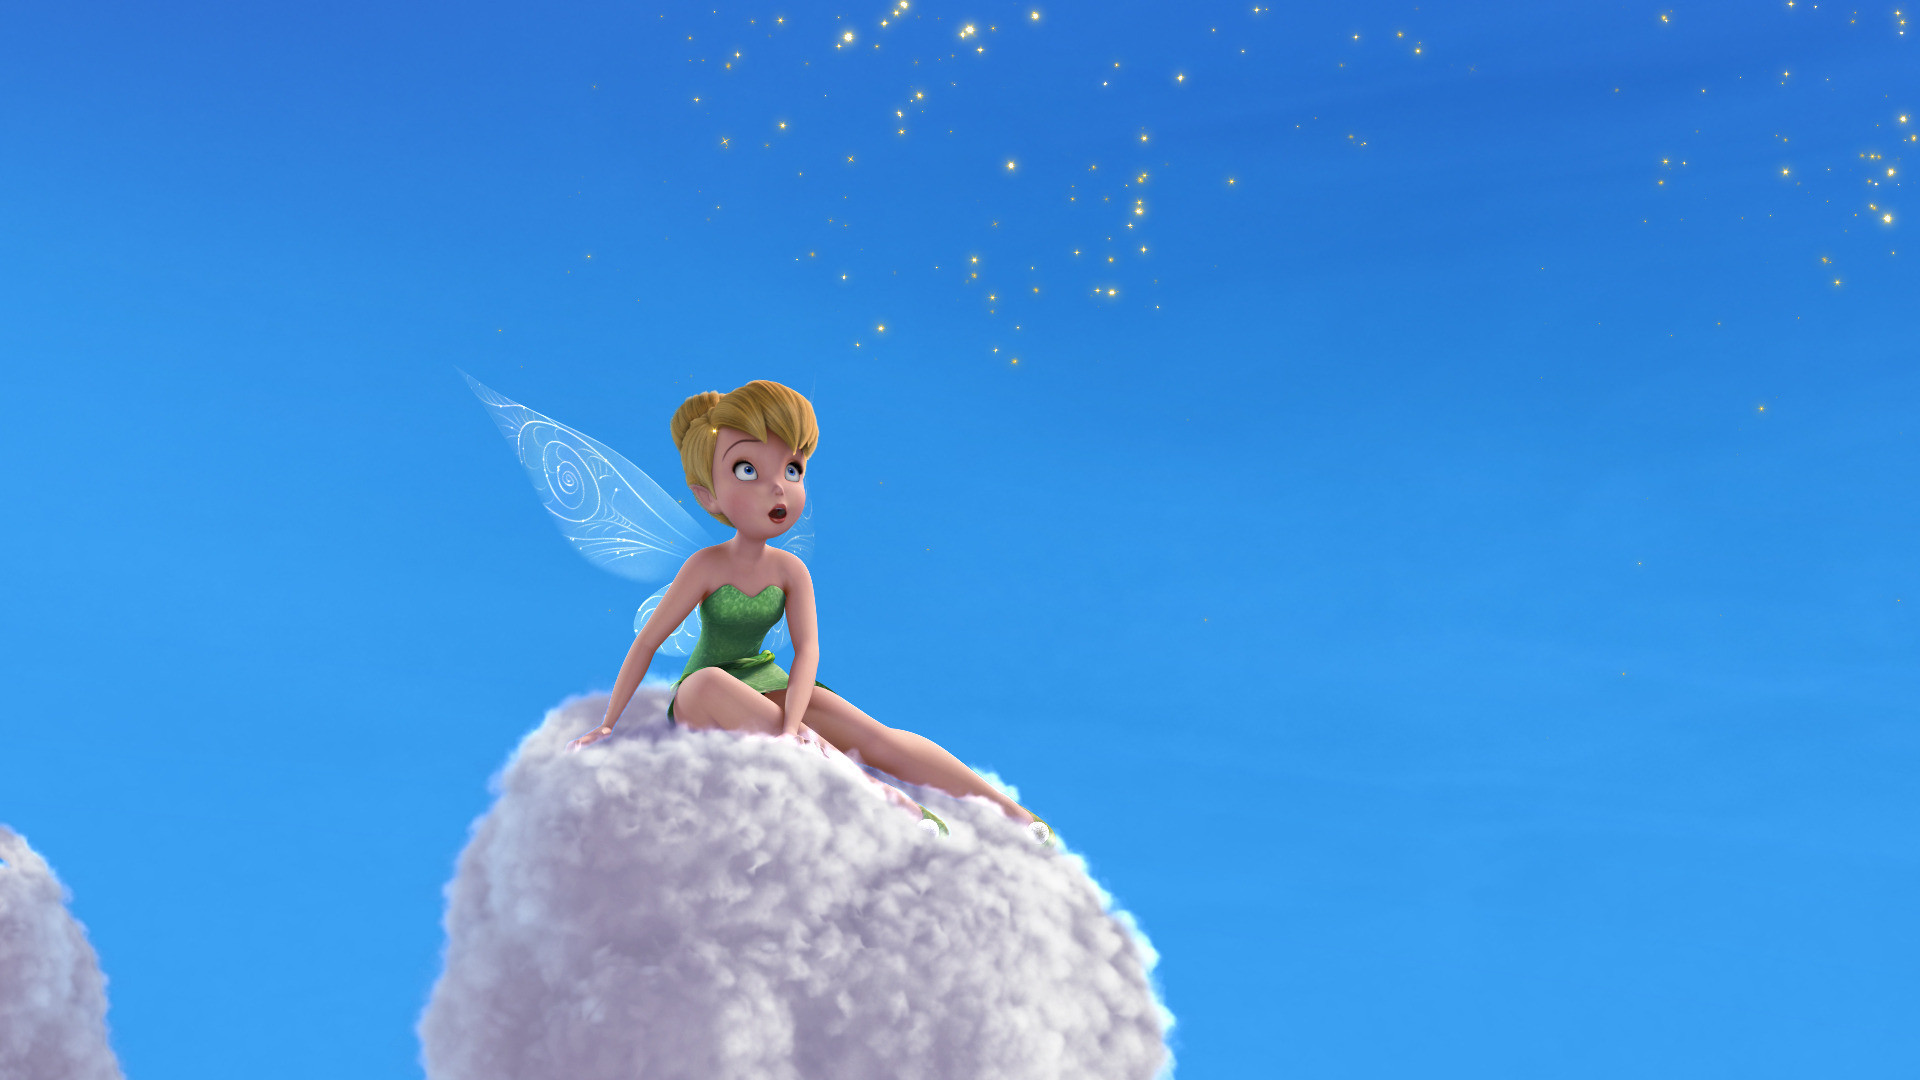 Tinker Bell And The Lost Treasure Wallpapers